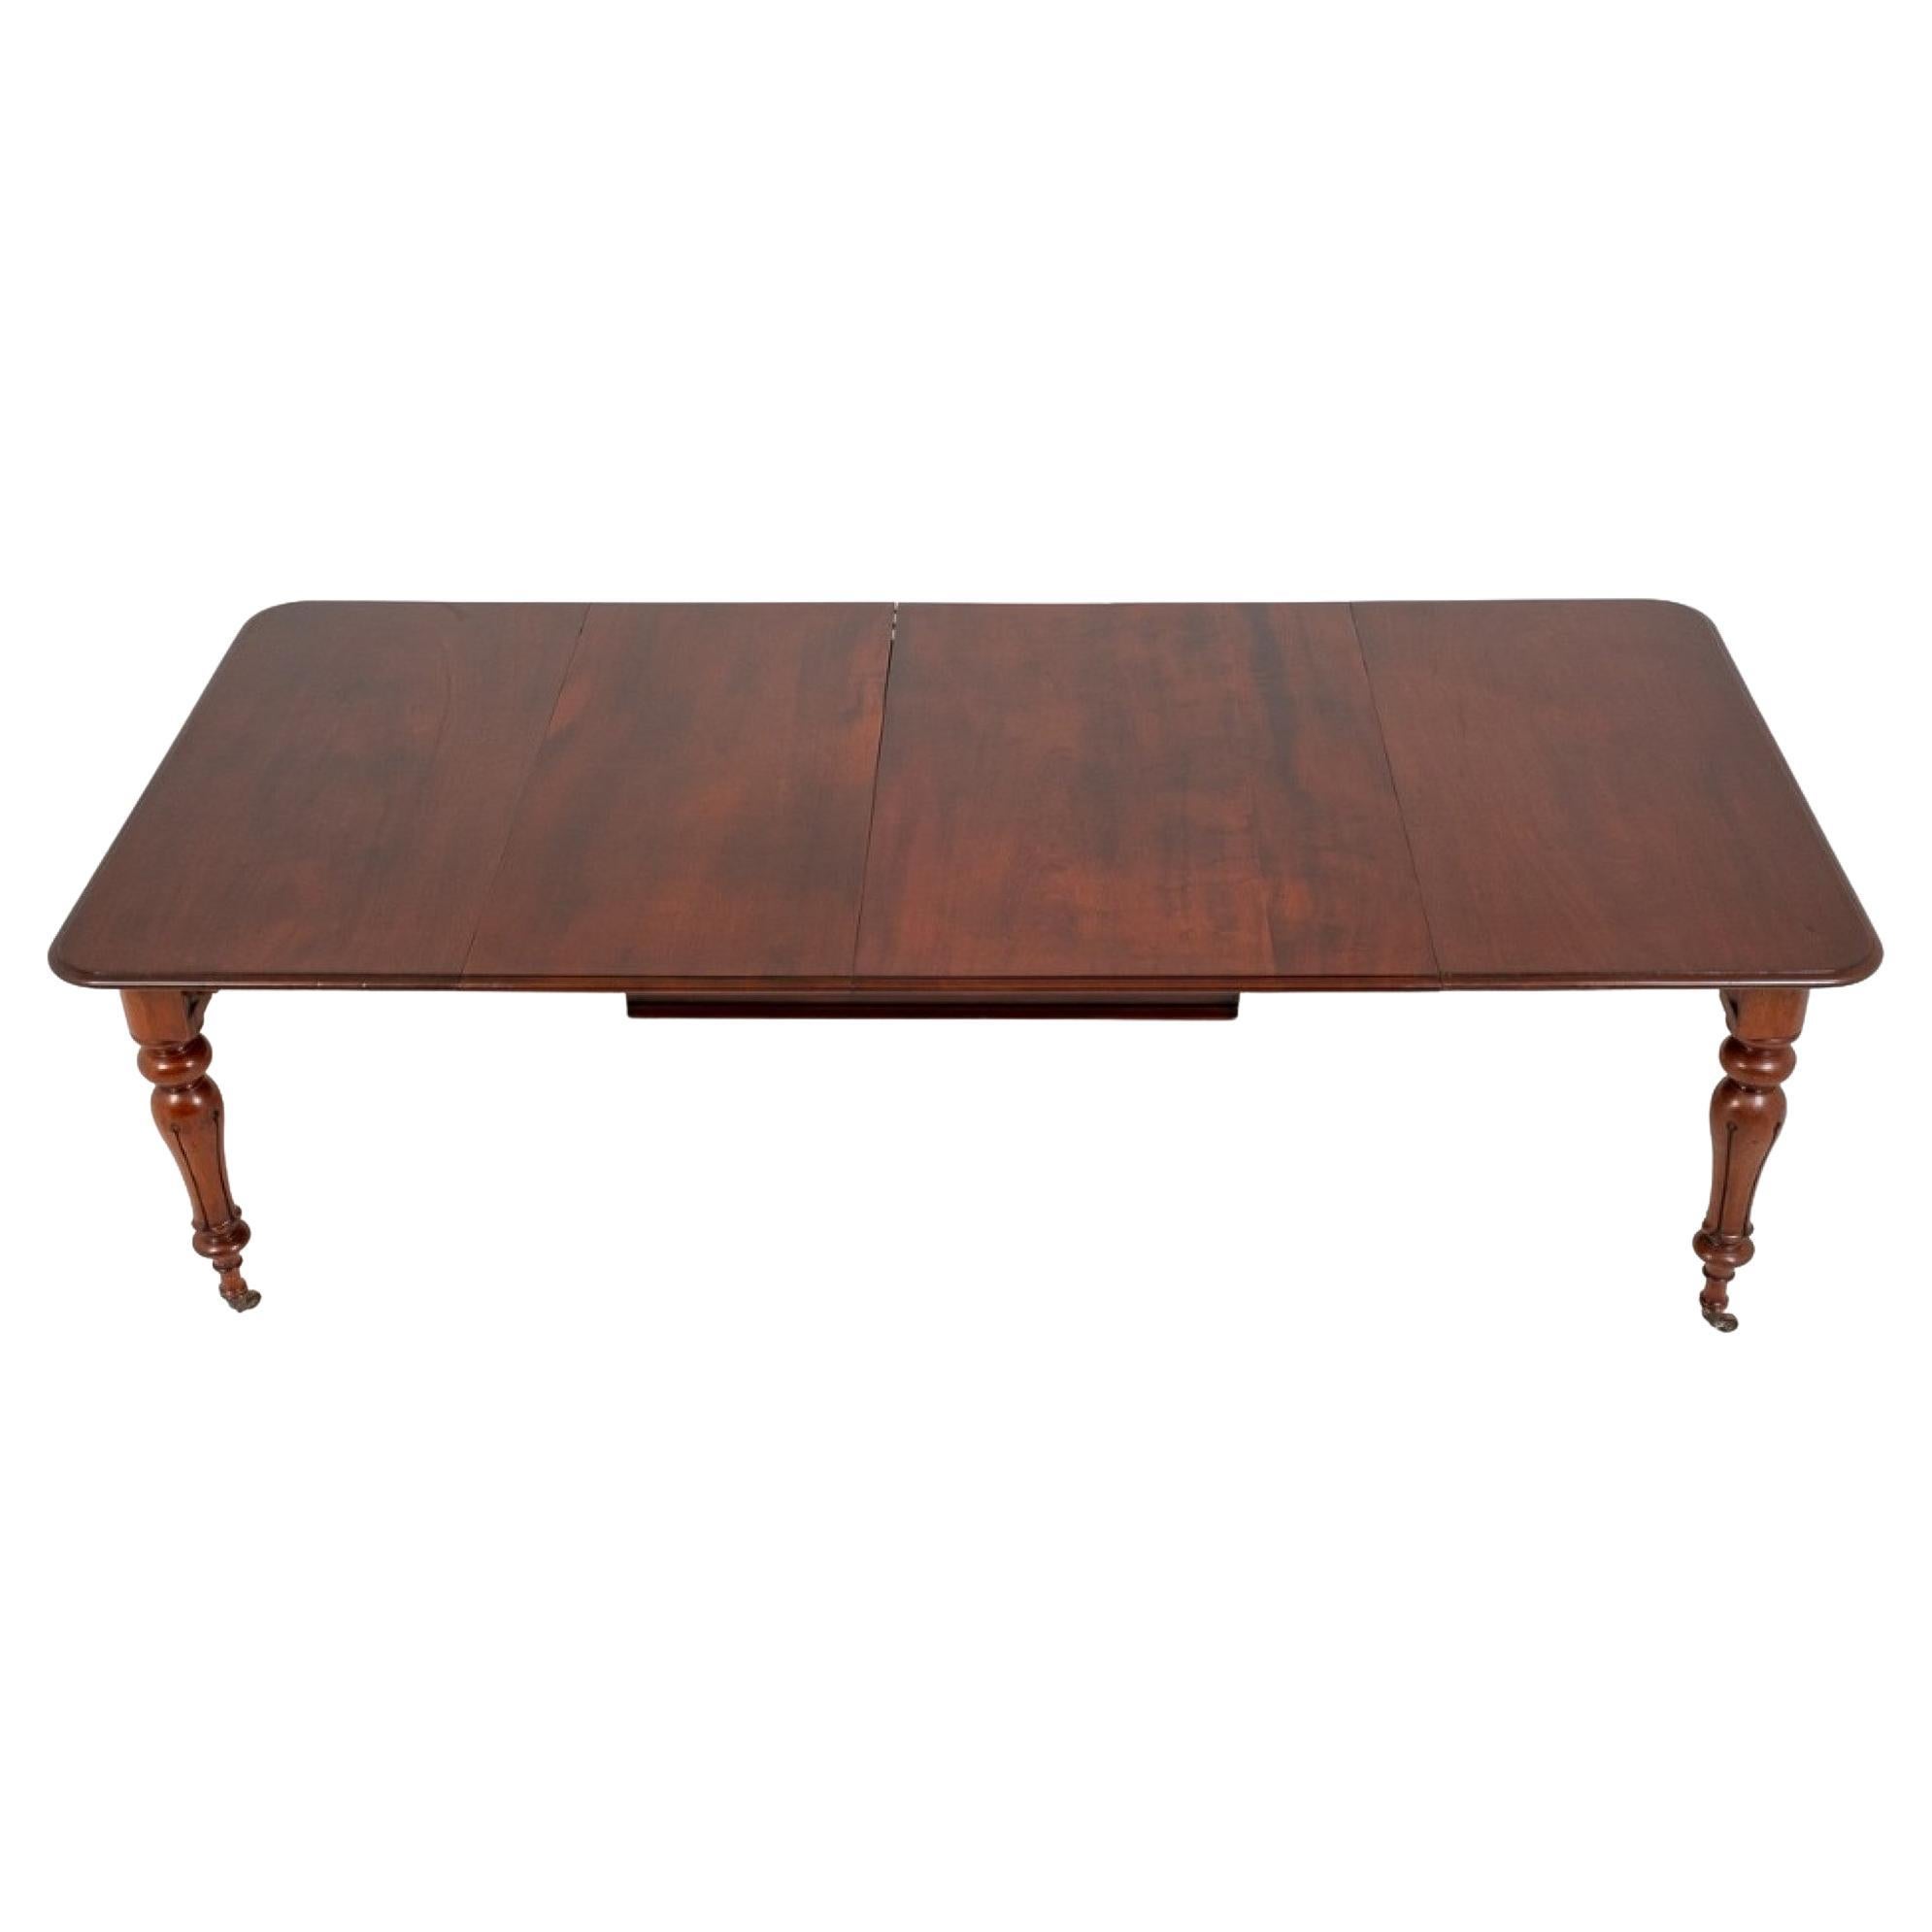 Extending Dining Table William IV Mahogany For Sale